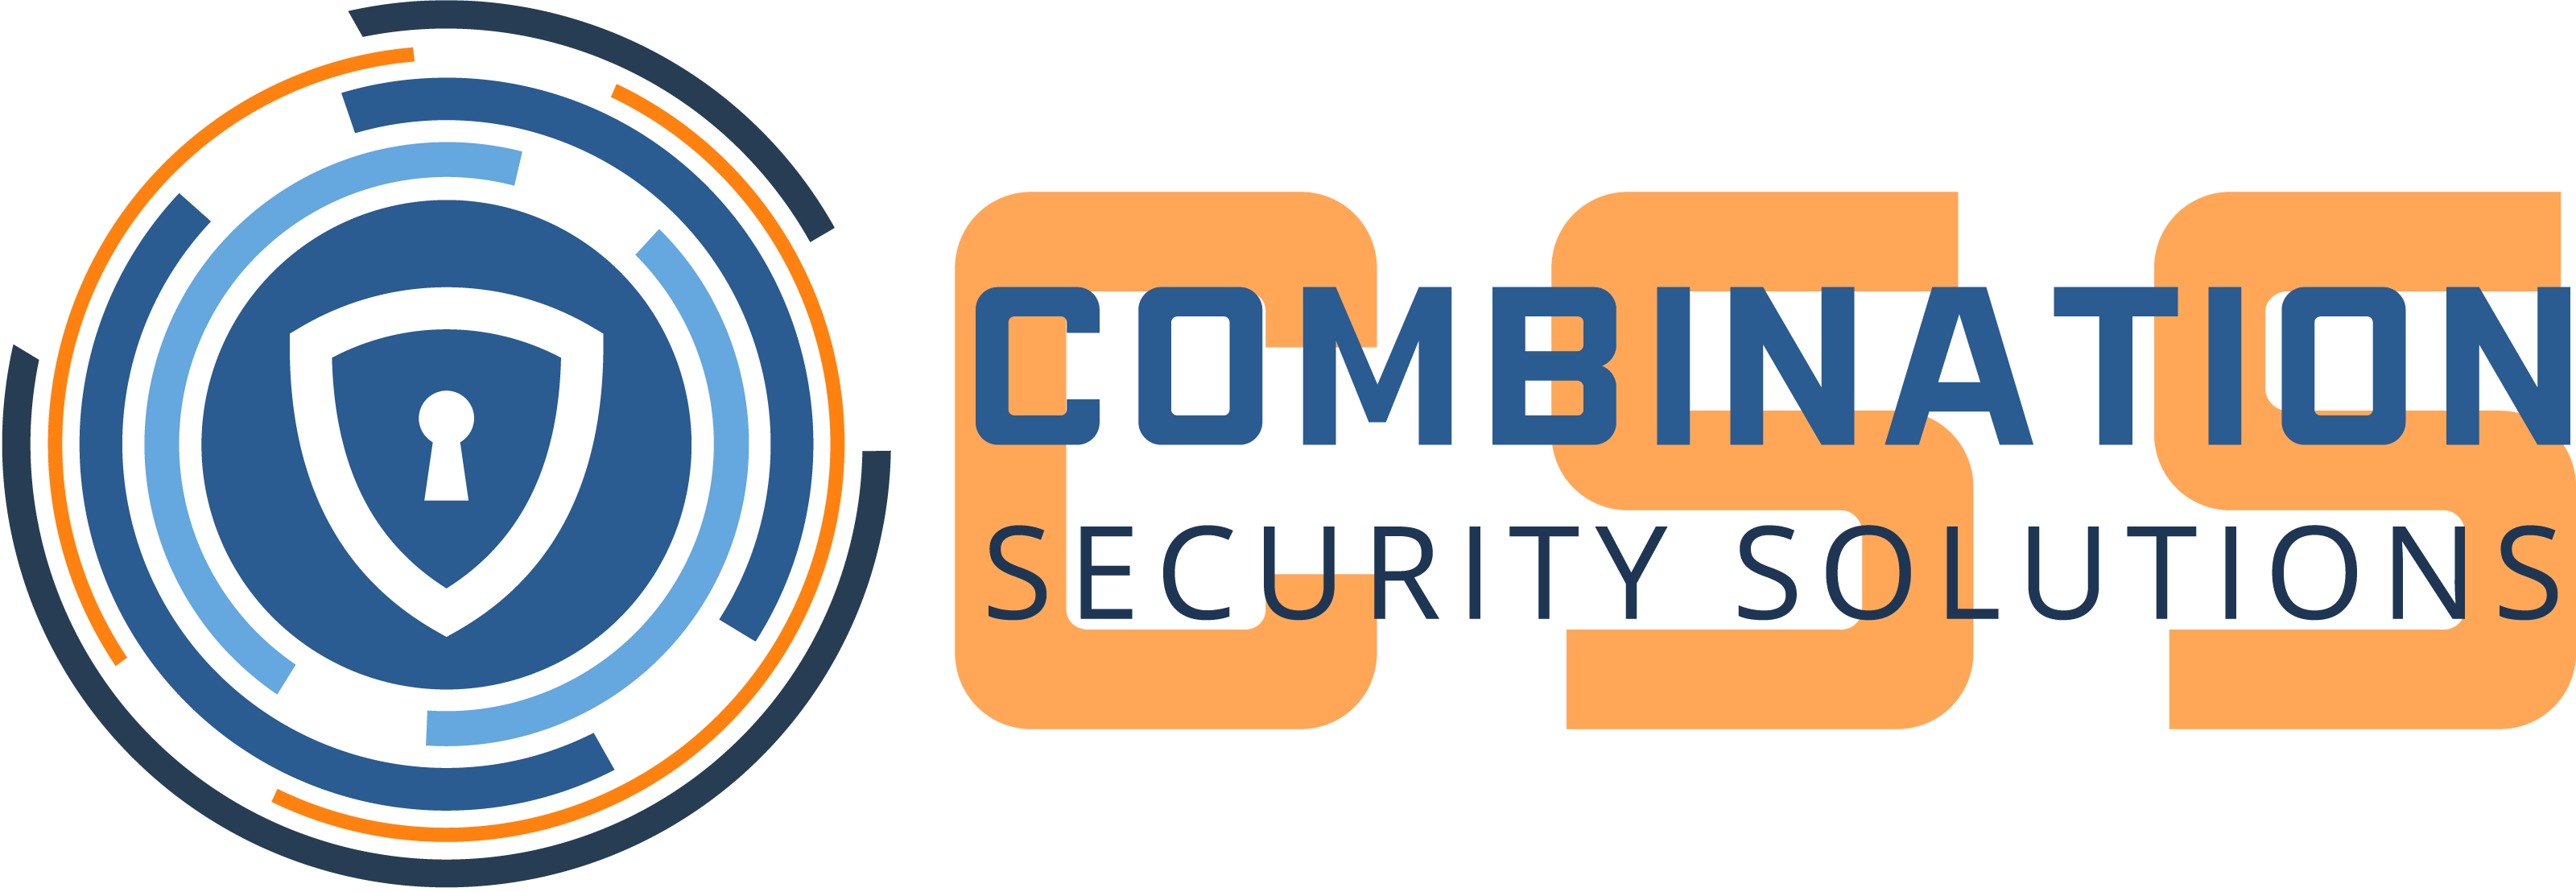 Combination Security Solutions (CSS) logo